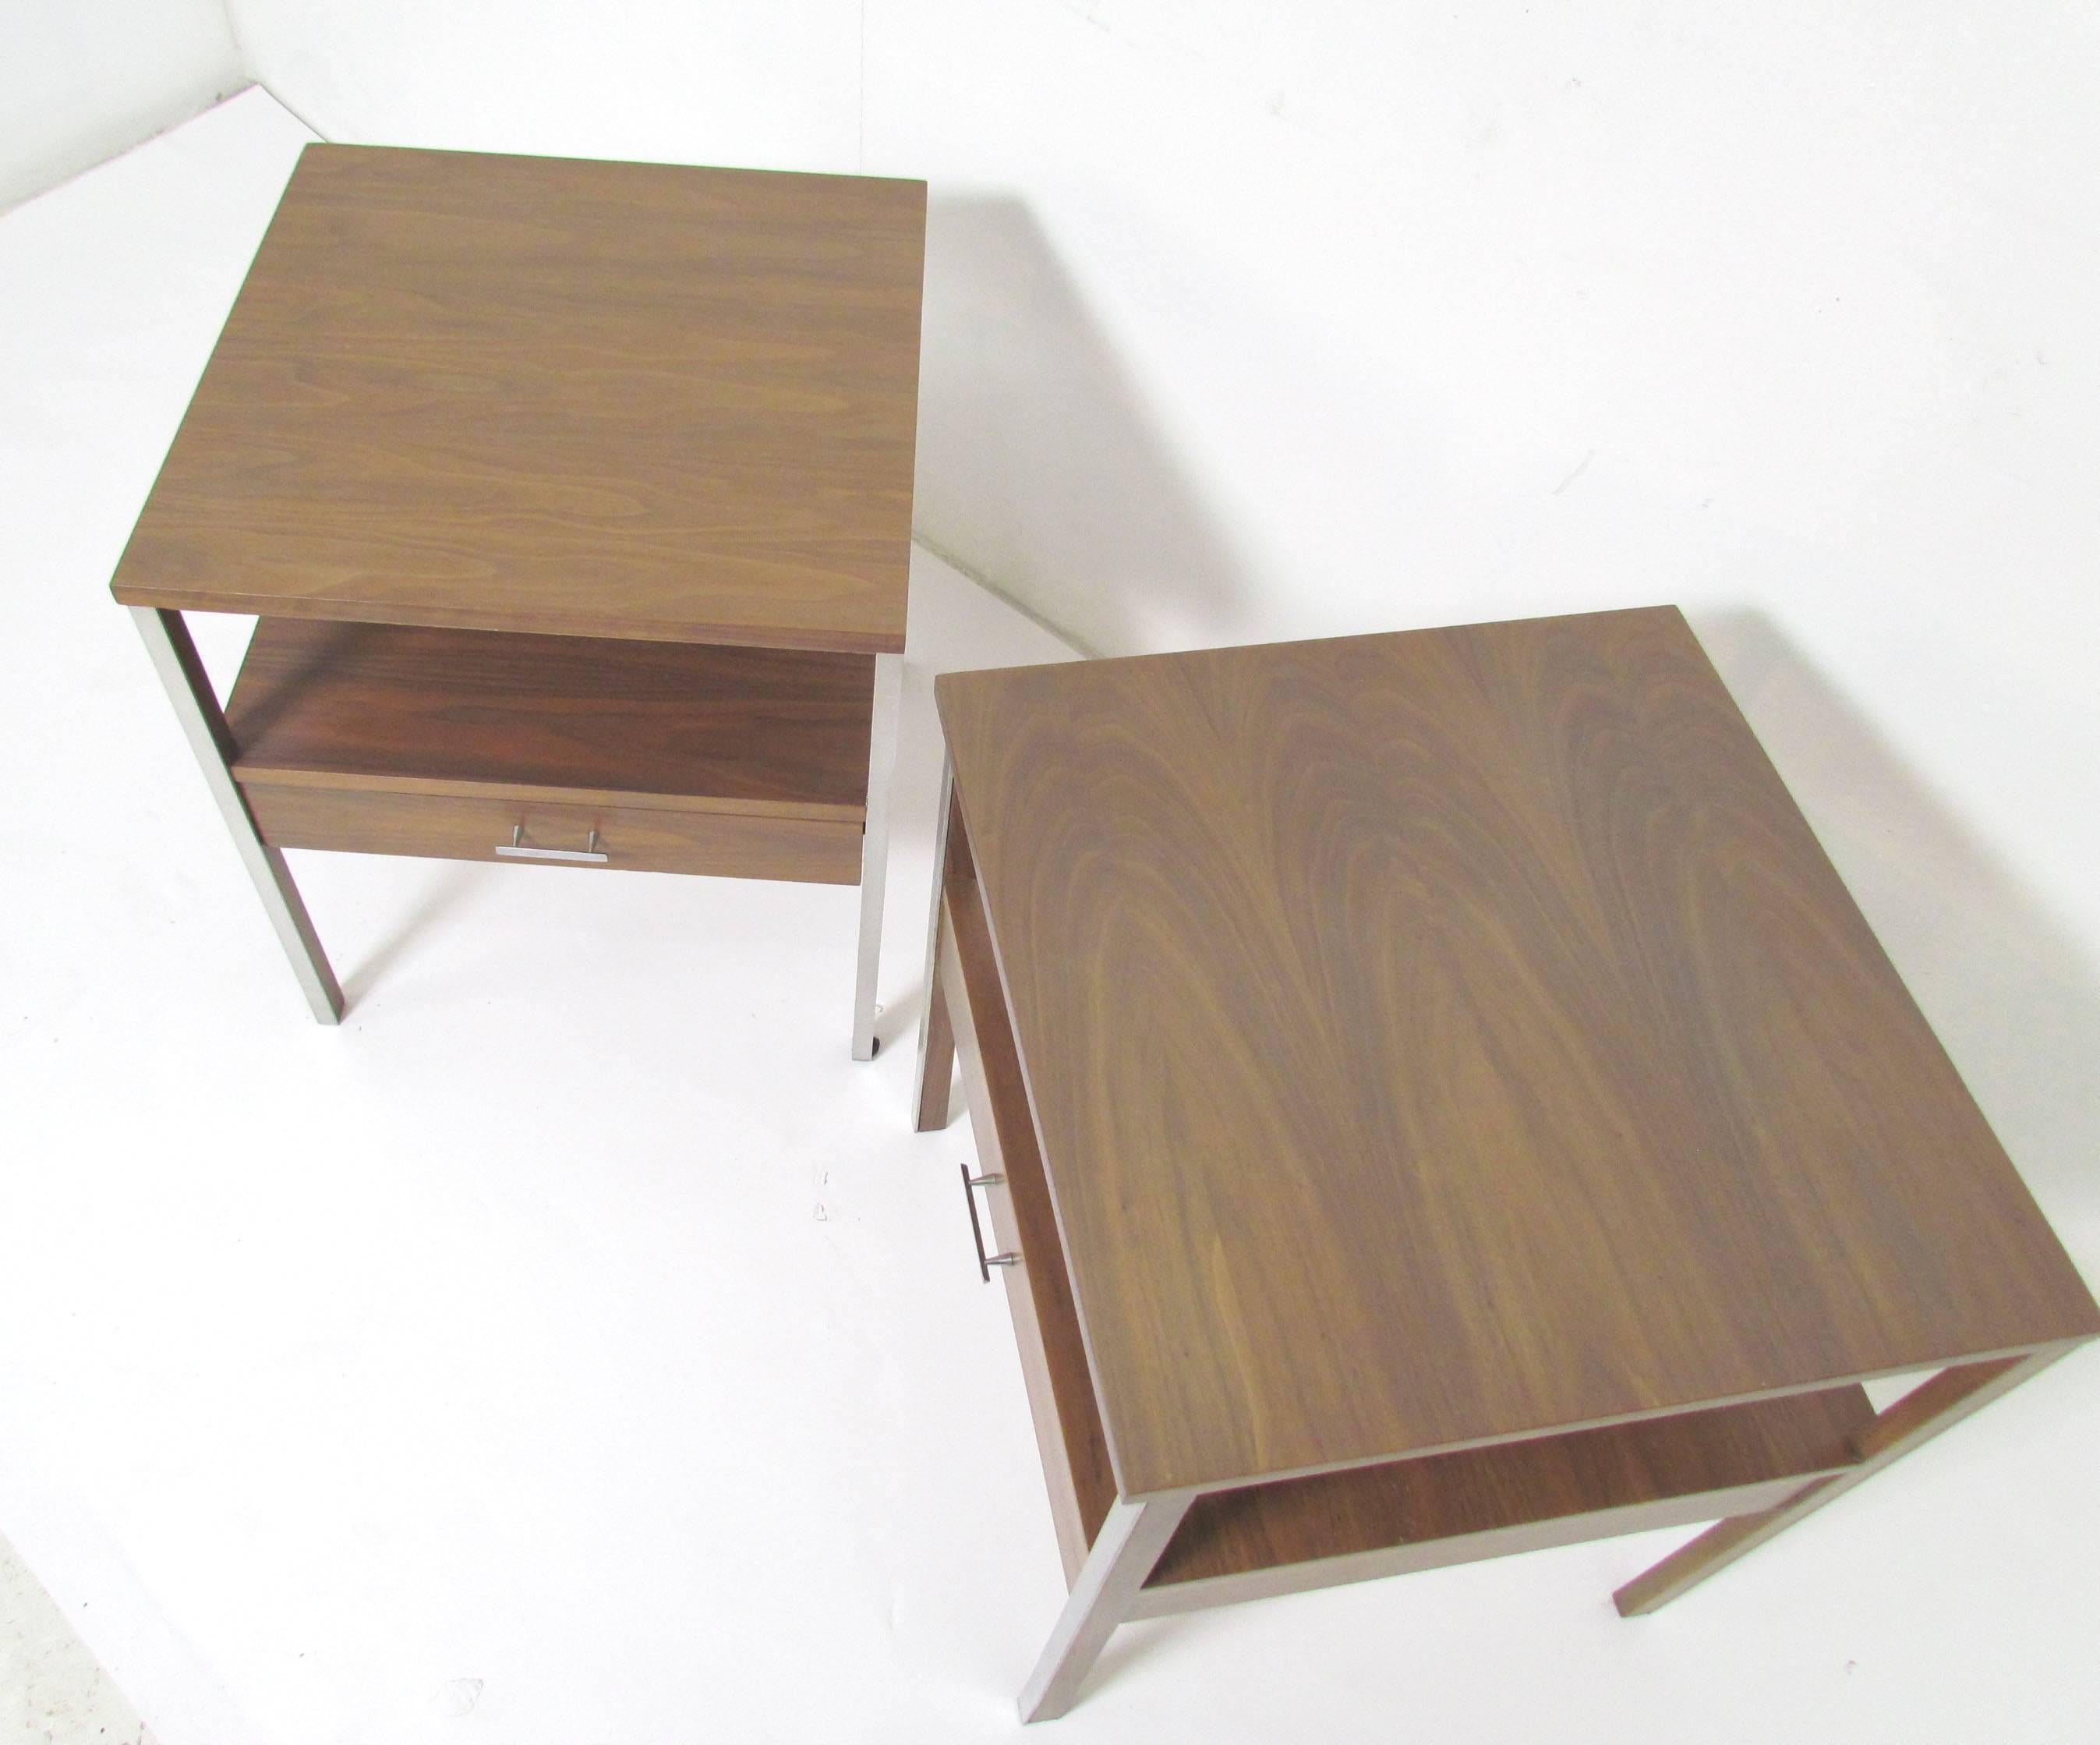 Pair of single drawer side tables with aluminium panels and hardware by Paul McCobb for Calvin, circa 1950s.